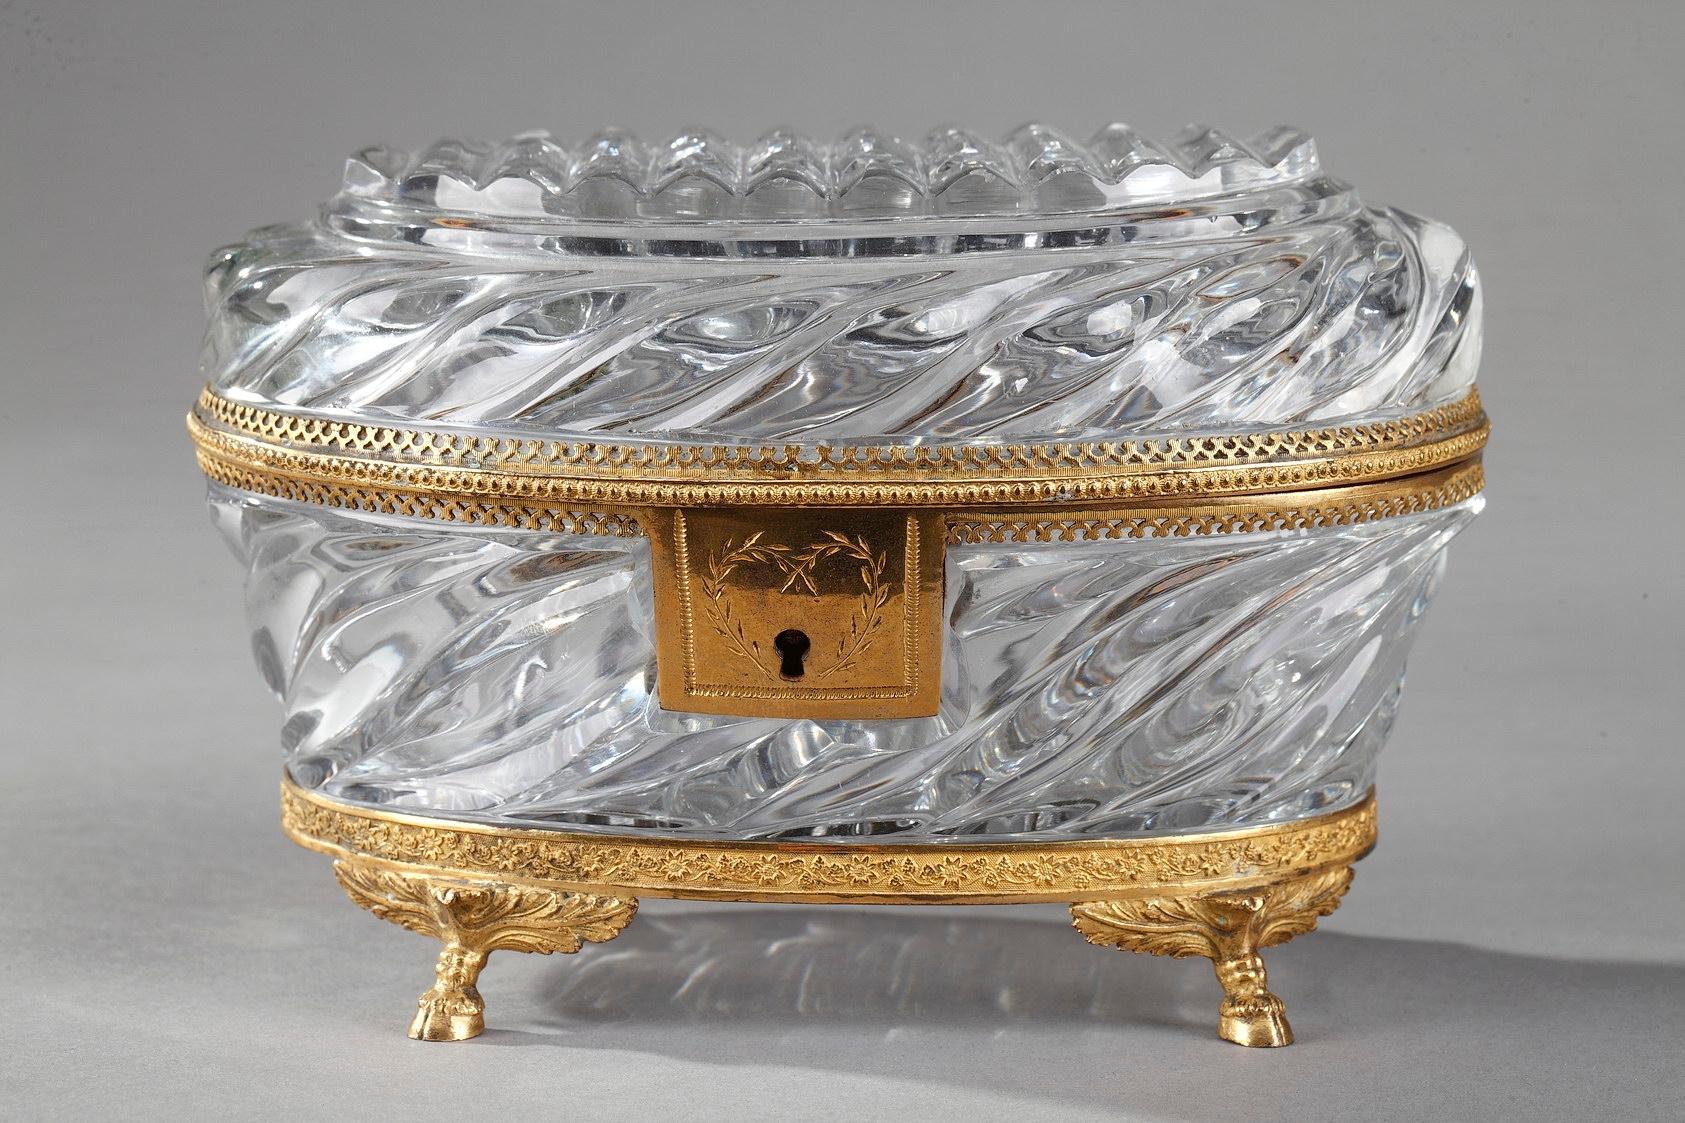 Exquisite oval-shaped cut-crystal antique jewelry box. The crystal is chiseled into twisted patterns, and the mounts are of gilt bronze, which is decorated with small flowers, pearls and openwork interlace. This antique box rests on four hooves feet